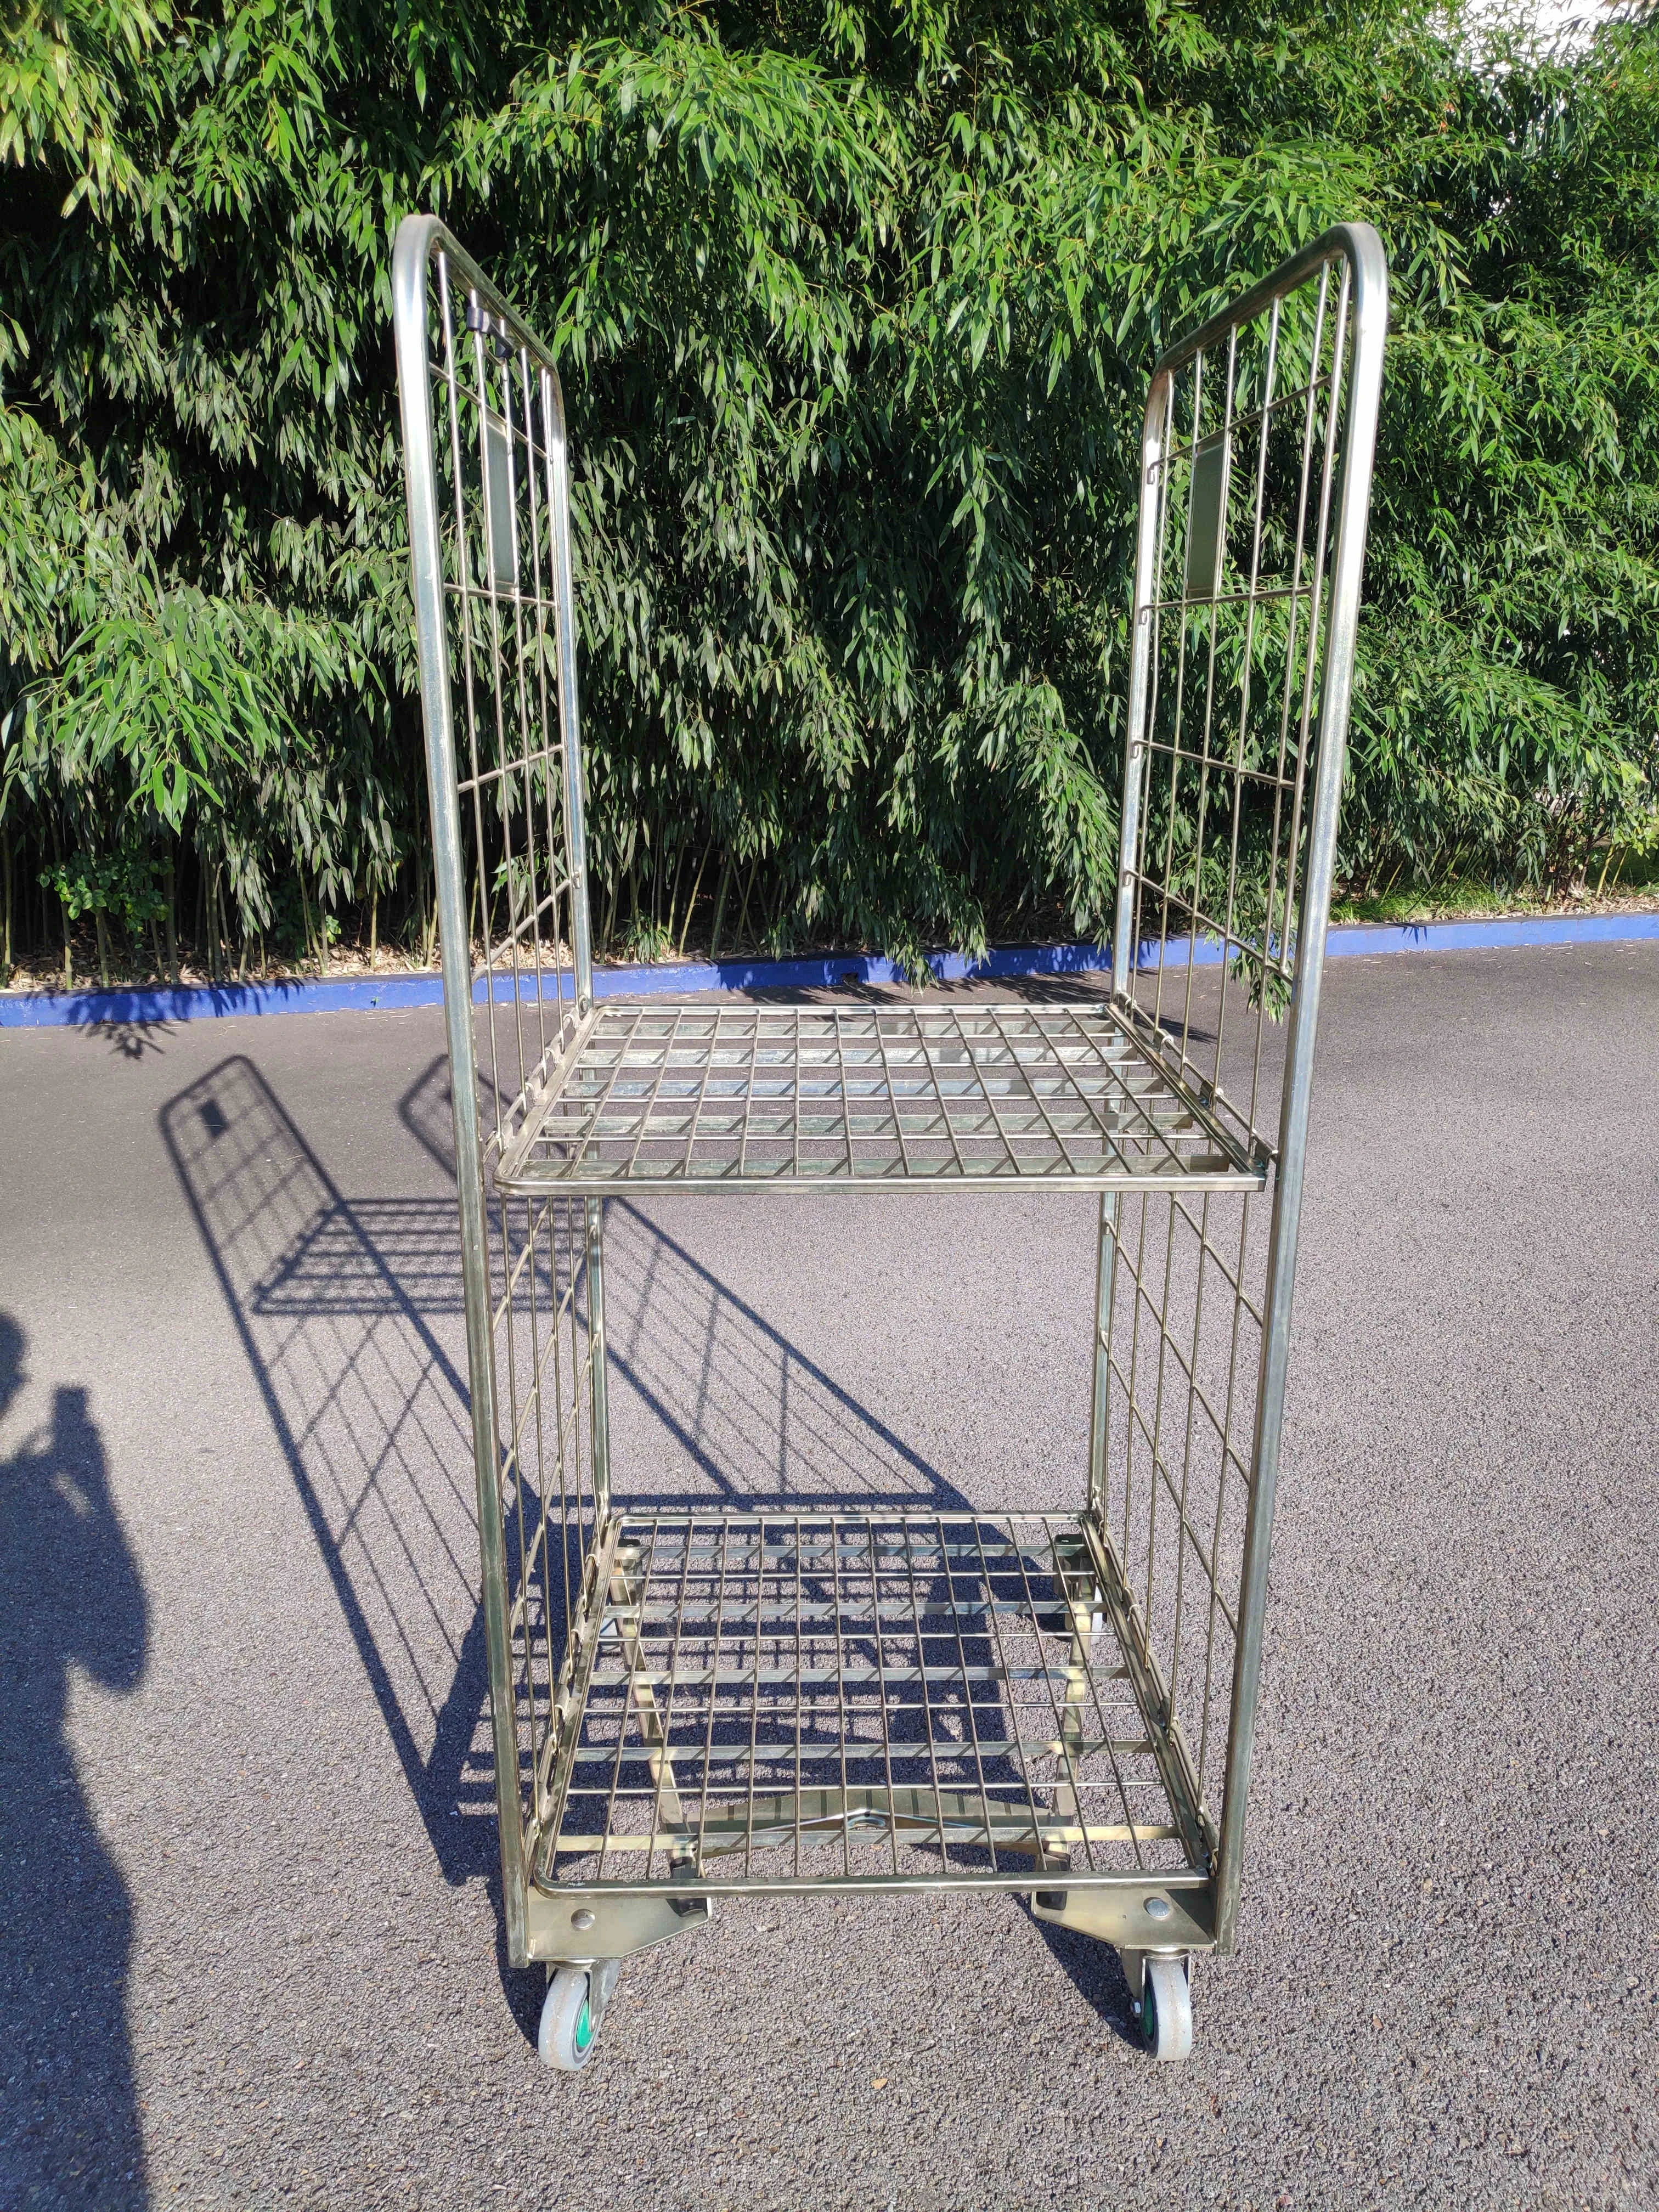 2 sided foldable galvanized cargo storage roll cage container collapsible nestable wire mesh rolling cart metal pallet trolley